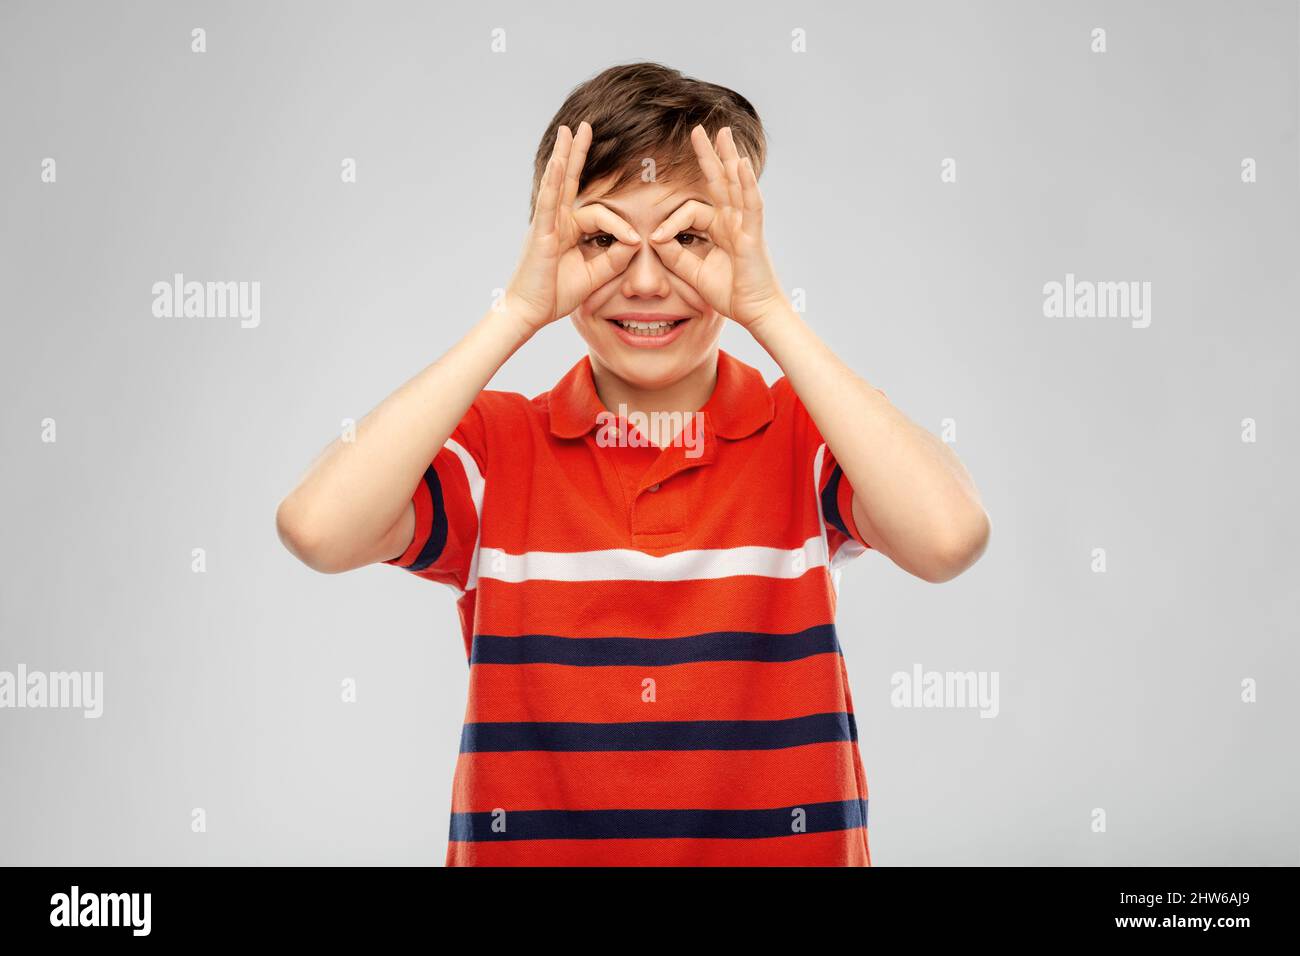 happy smiling boy looking through finger glasses Stock Photo